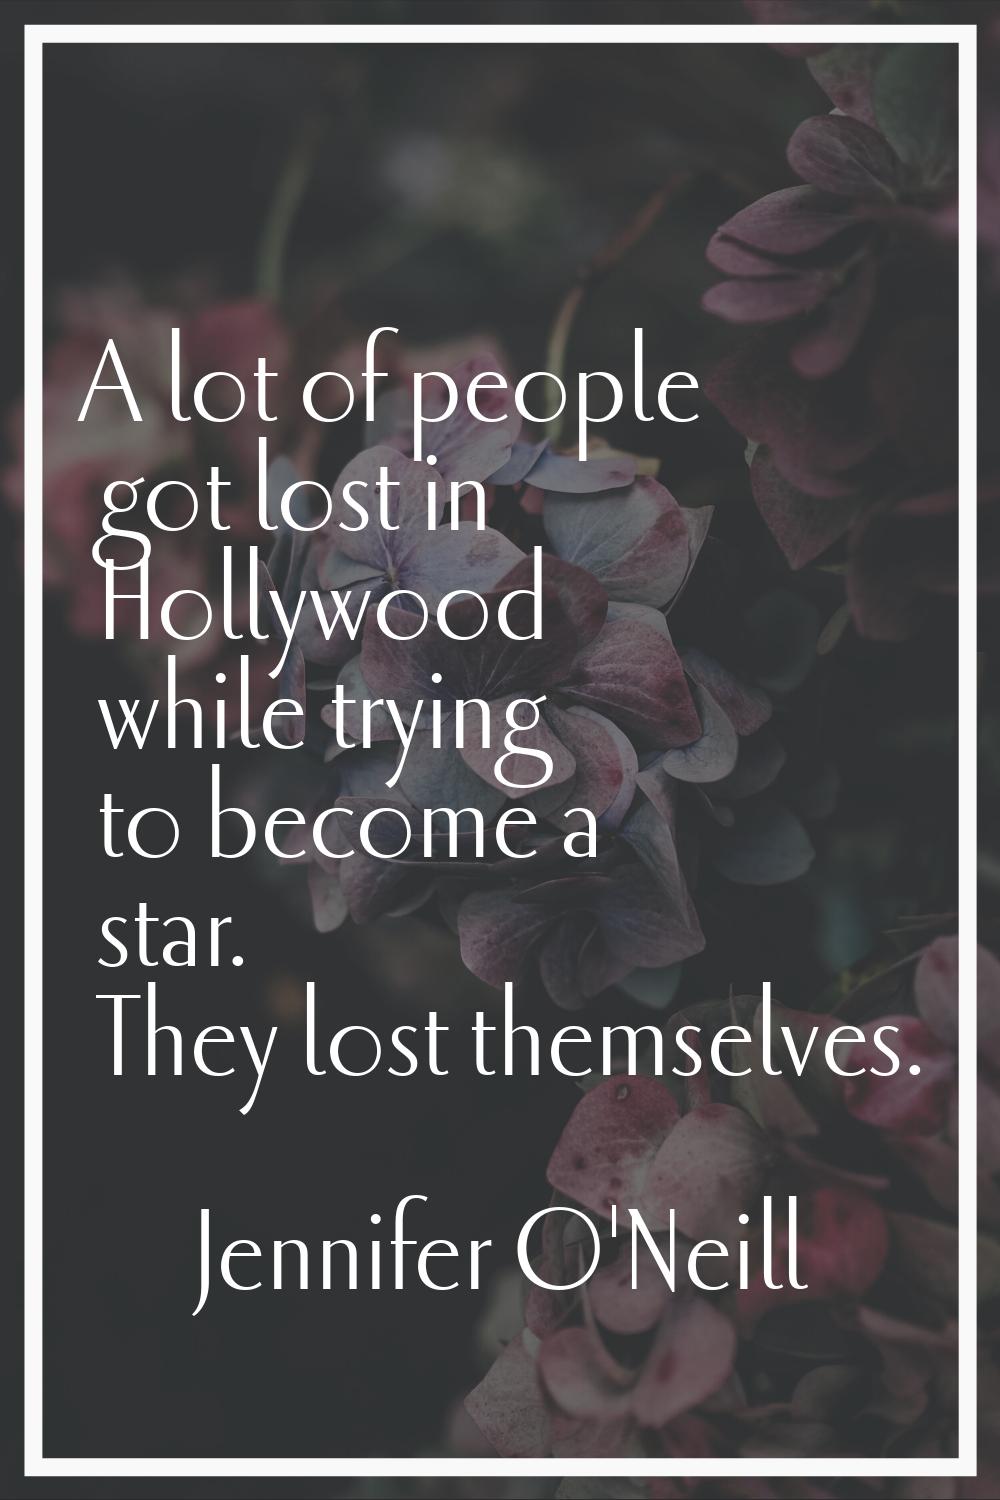 A lot of people got lost in Hollywood while trying to become a star. They lost themselves.